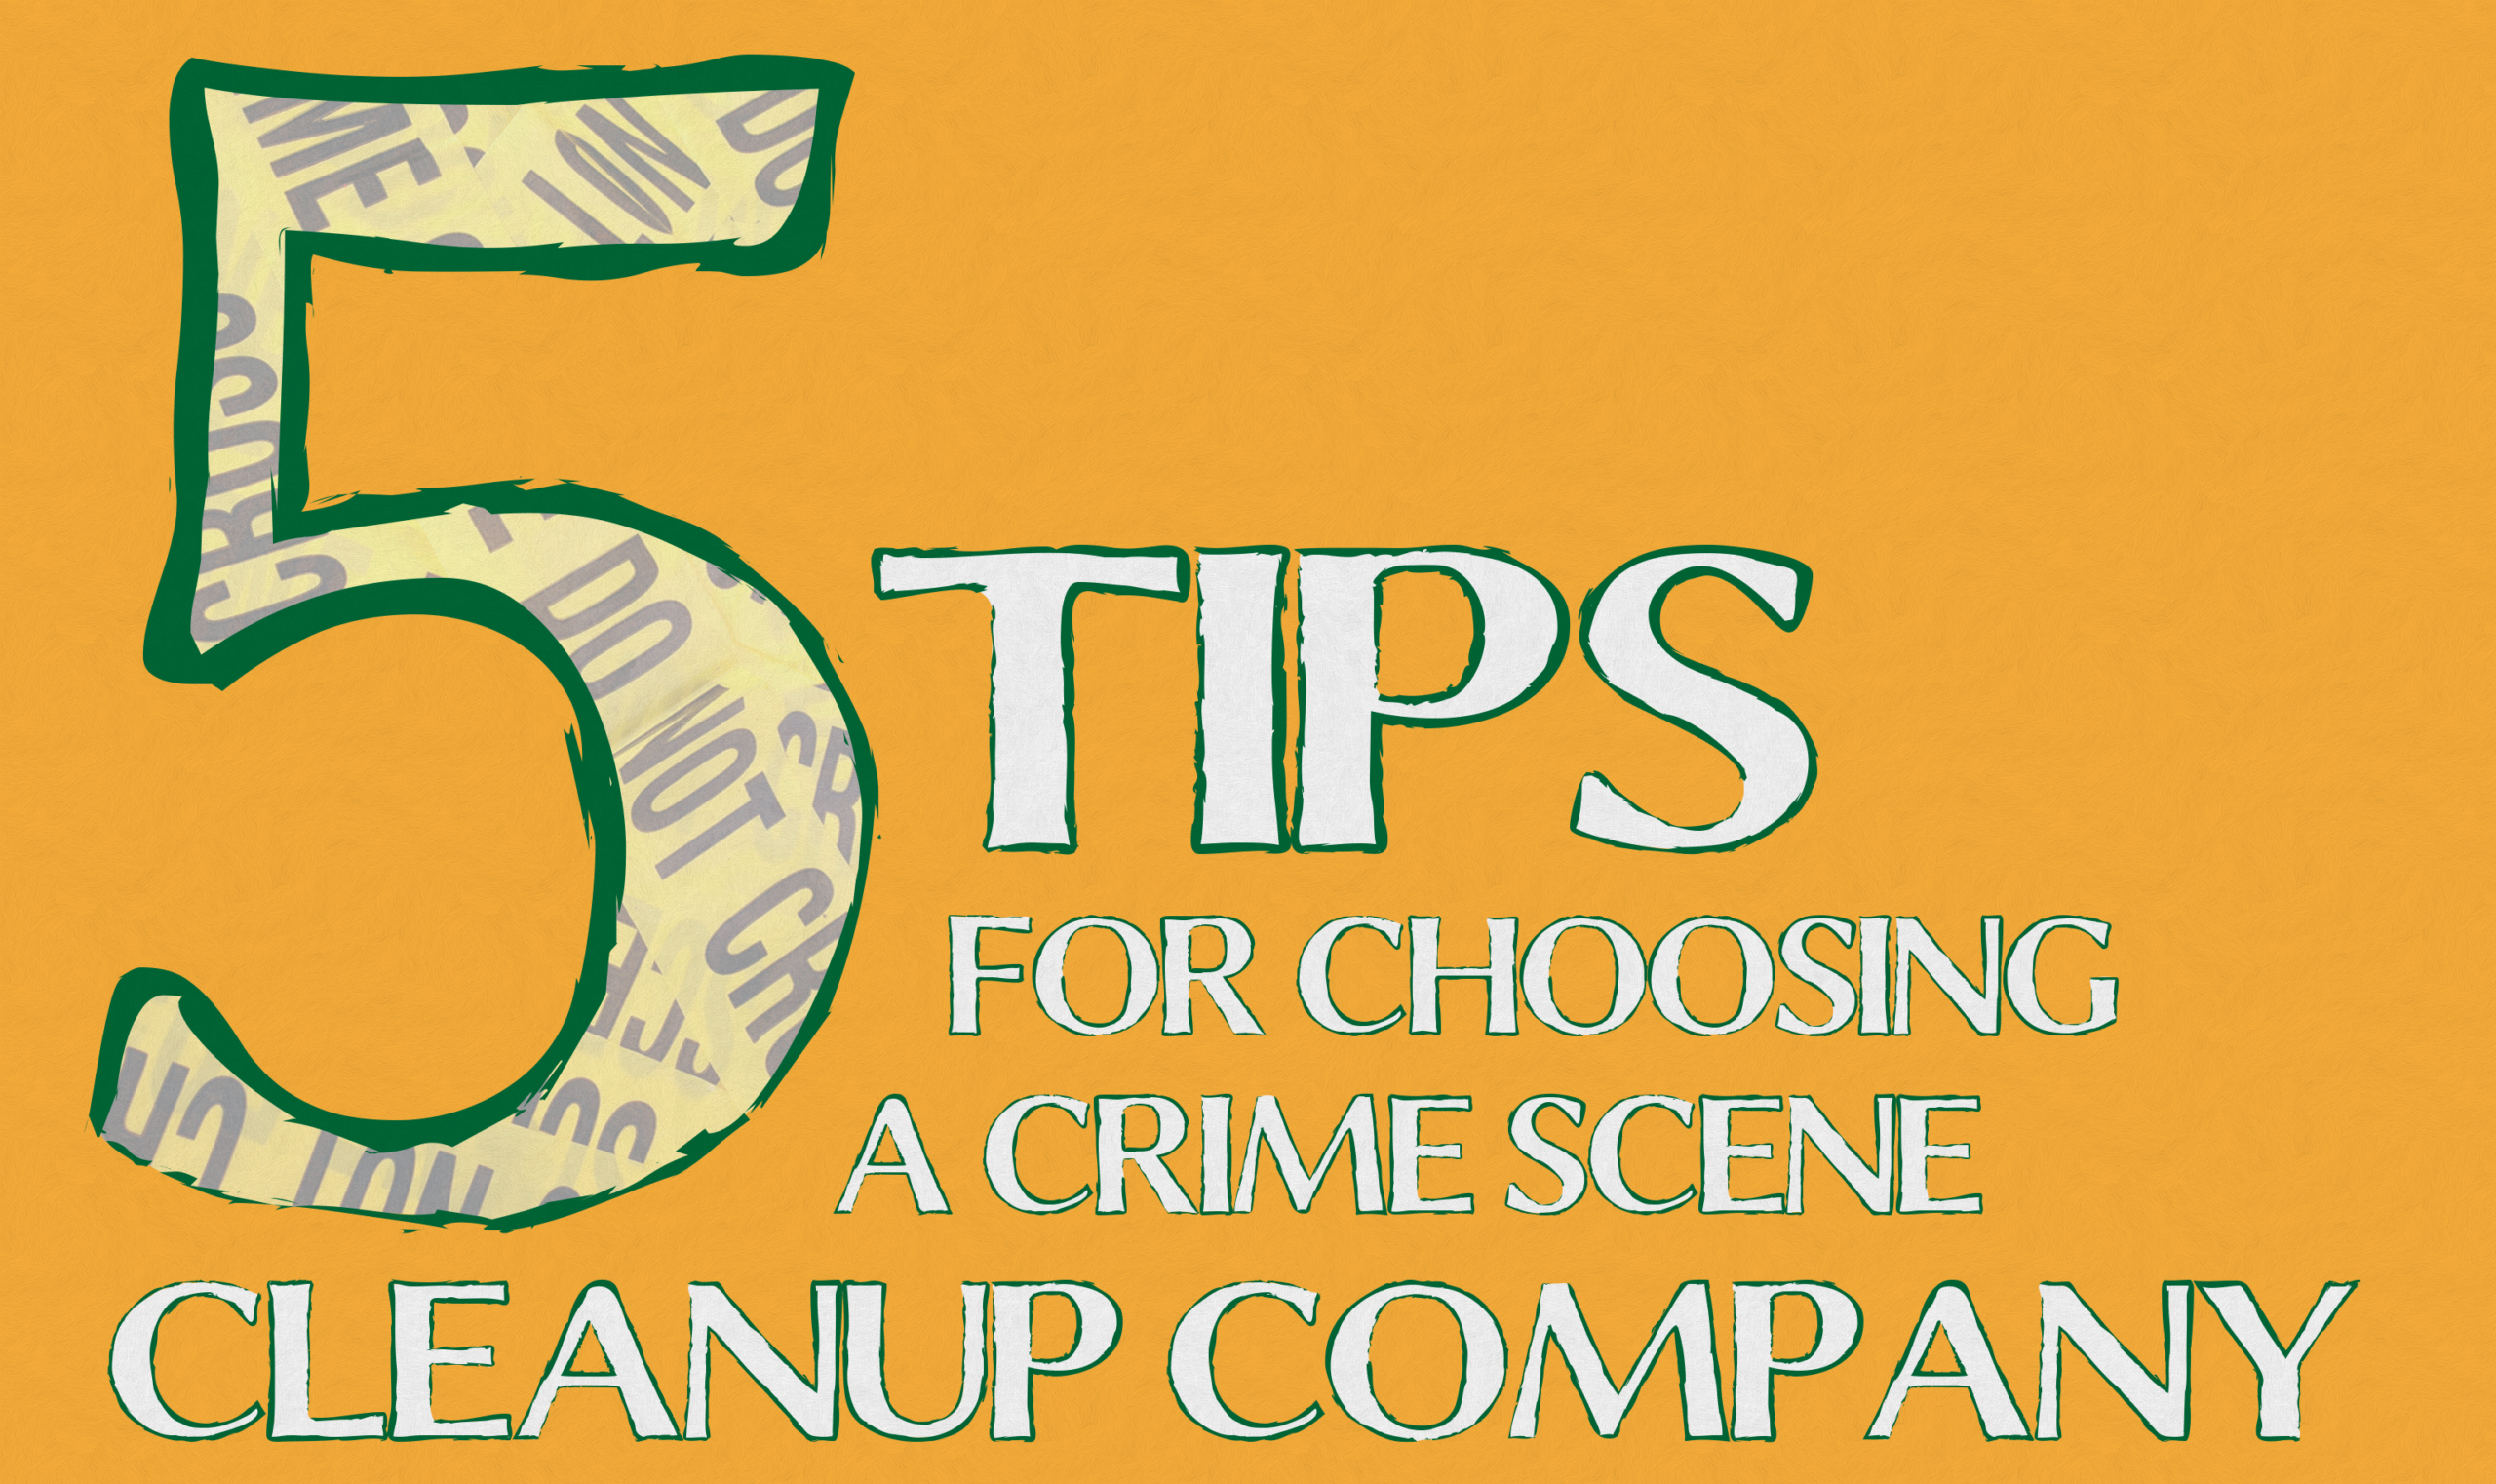 Featured image for “5 Tips for Choosing A Crime Scene Cleanup Company”